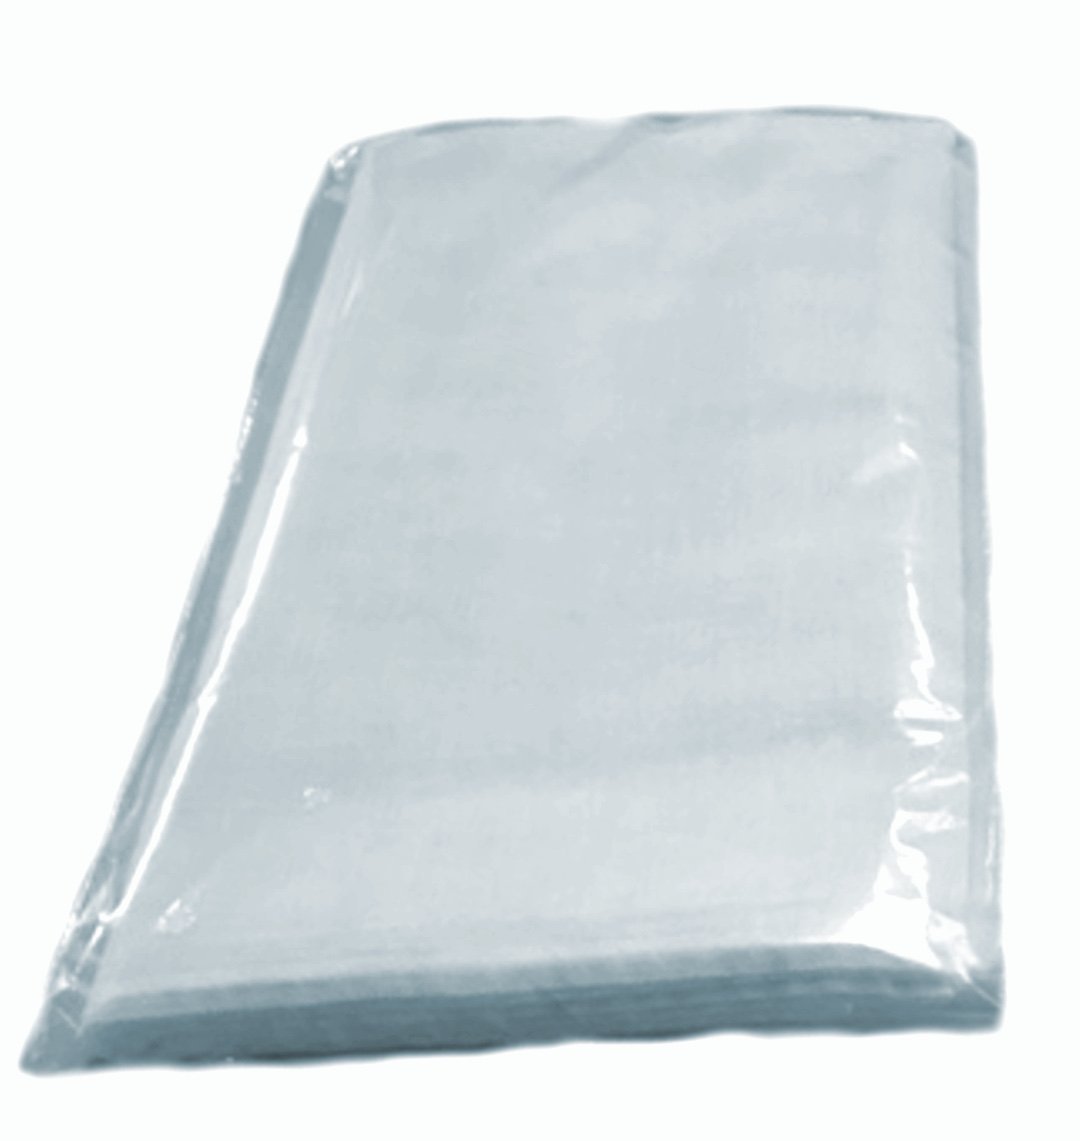 Grade 90 White Cheesecloth 9 Square Ft Individually Bagged - Click Image to Close